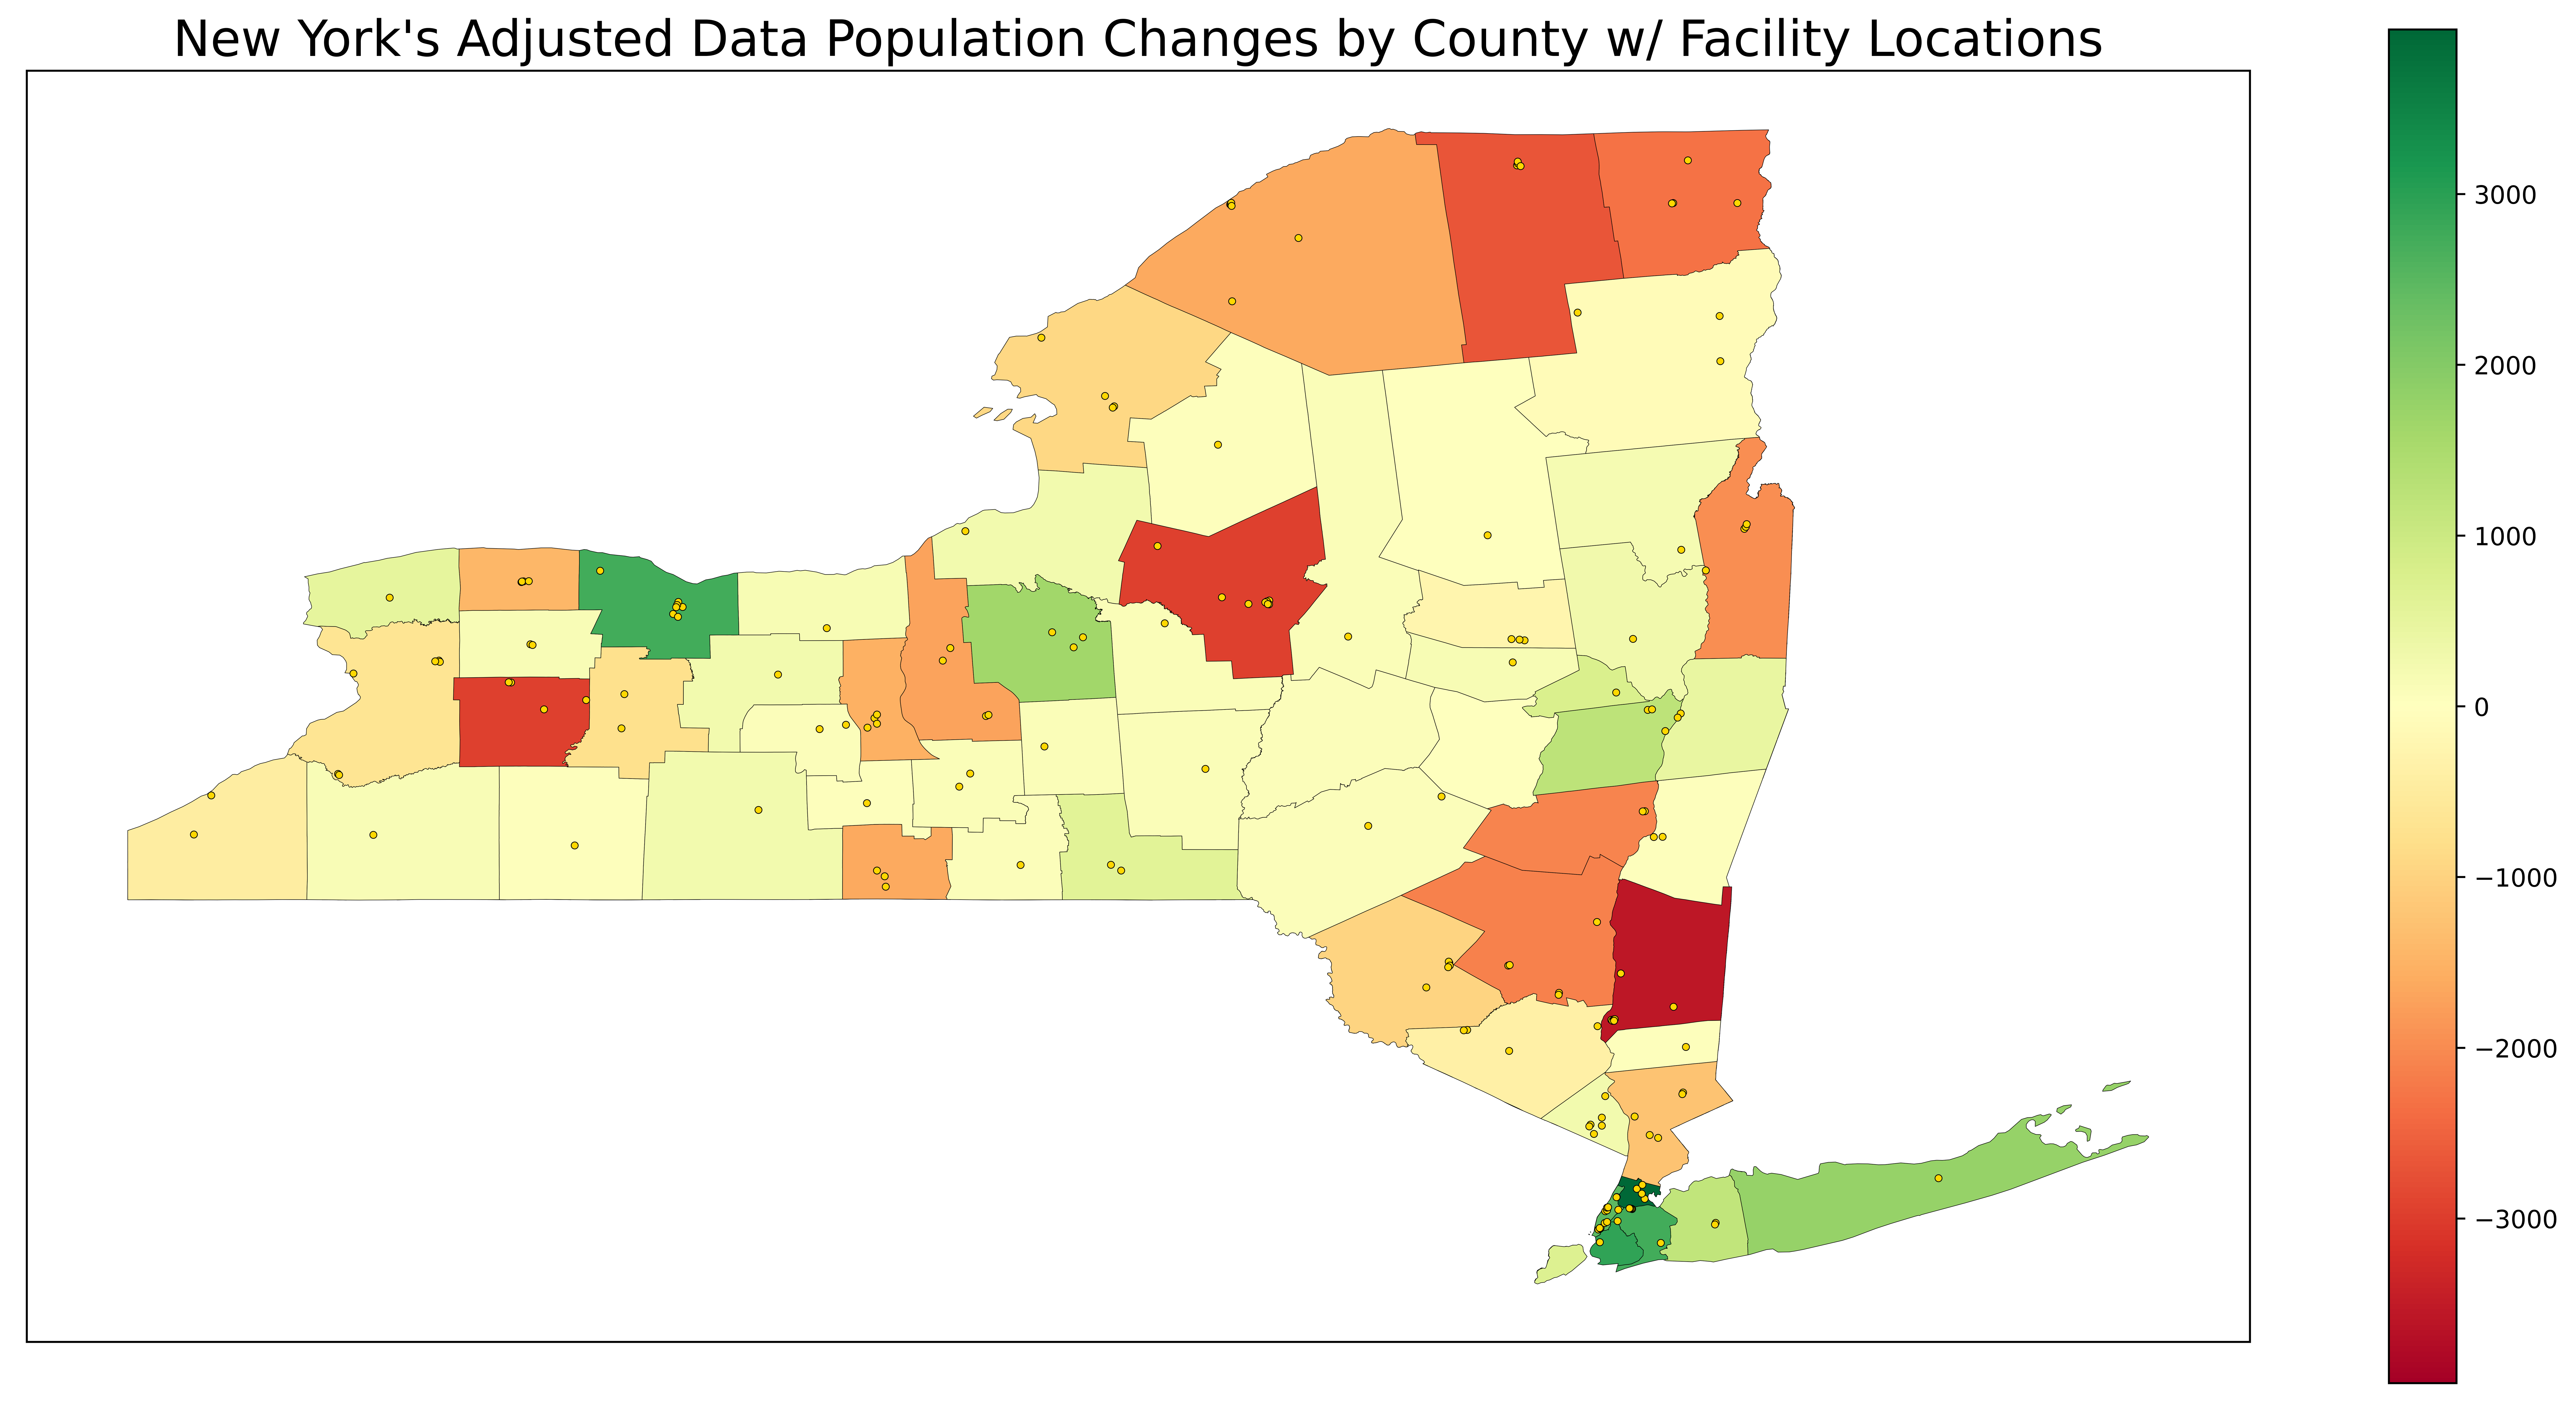 New York's Adjusted Data Population Changes by County with Facility Locations